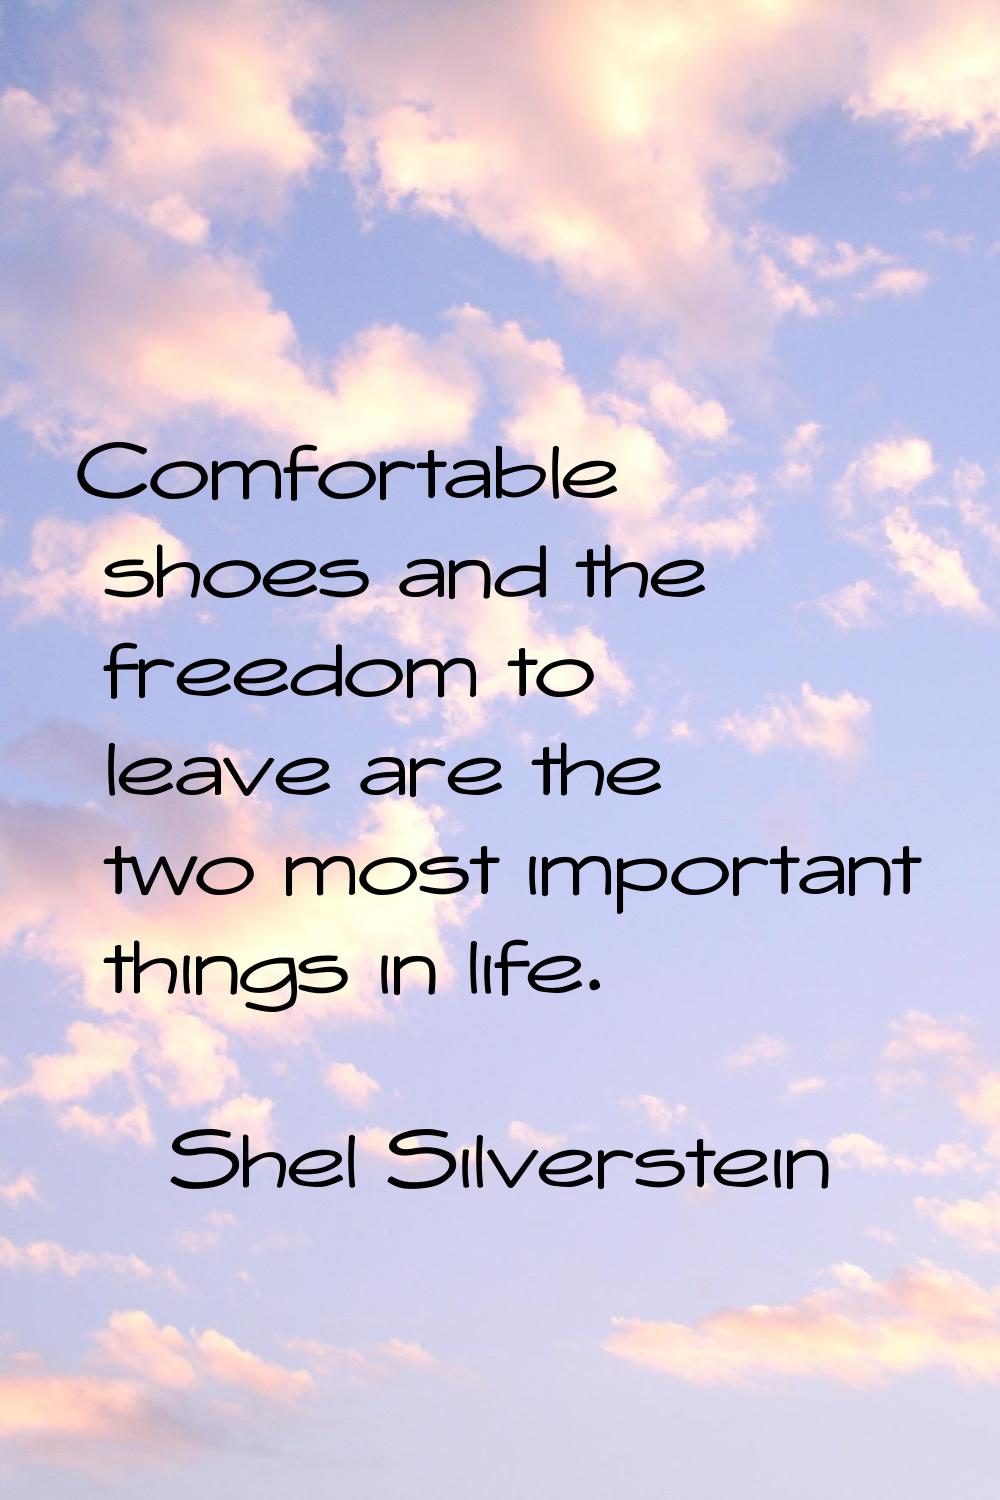 Comfortable shoes and the freedom to leave are the two most important things in life.